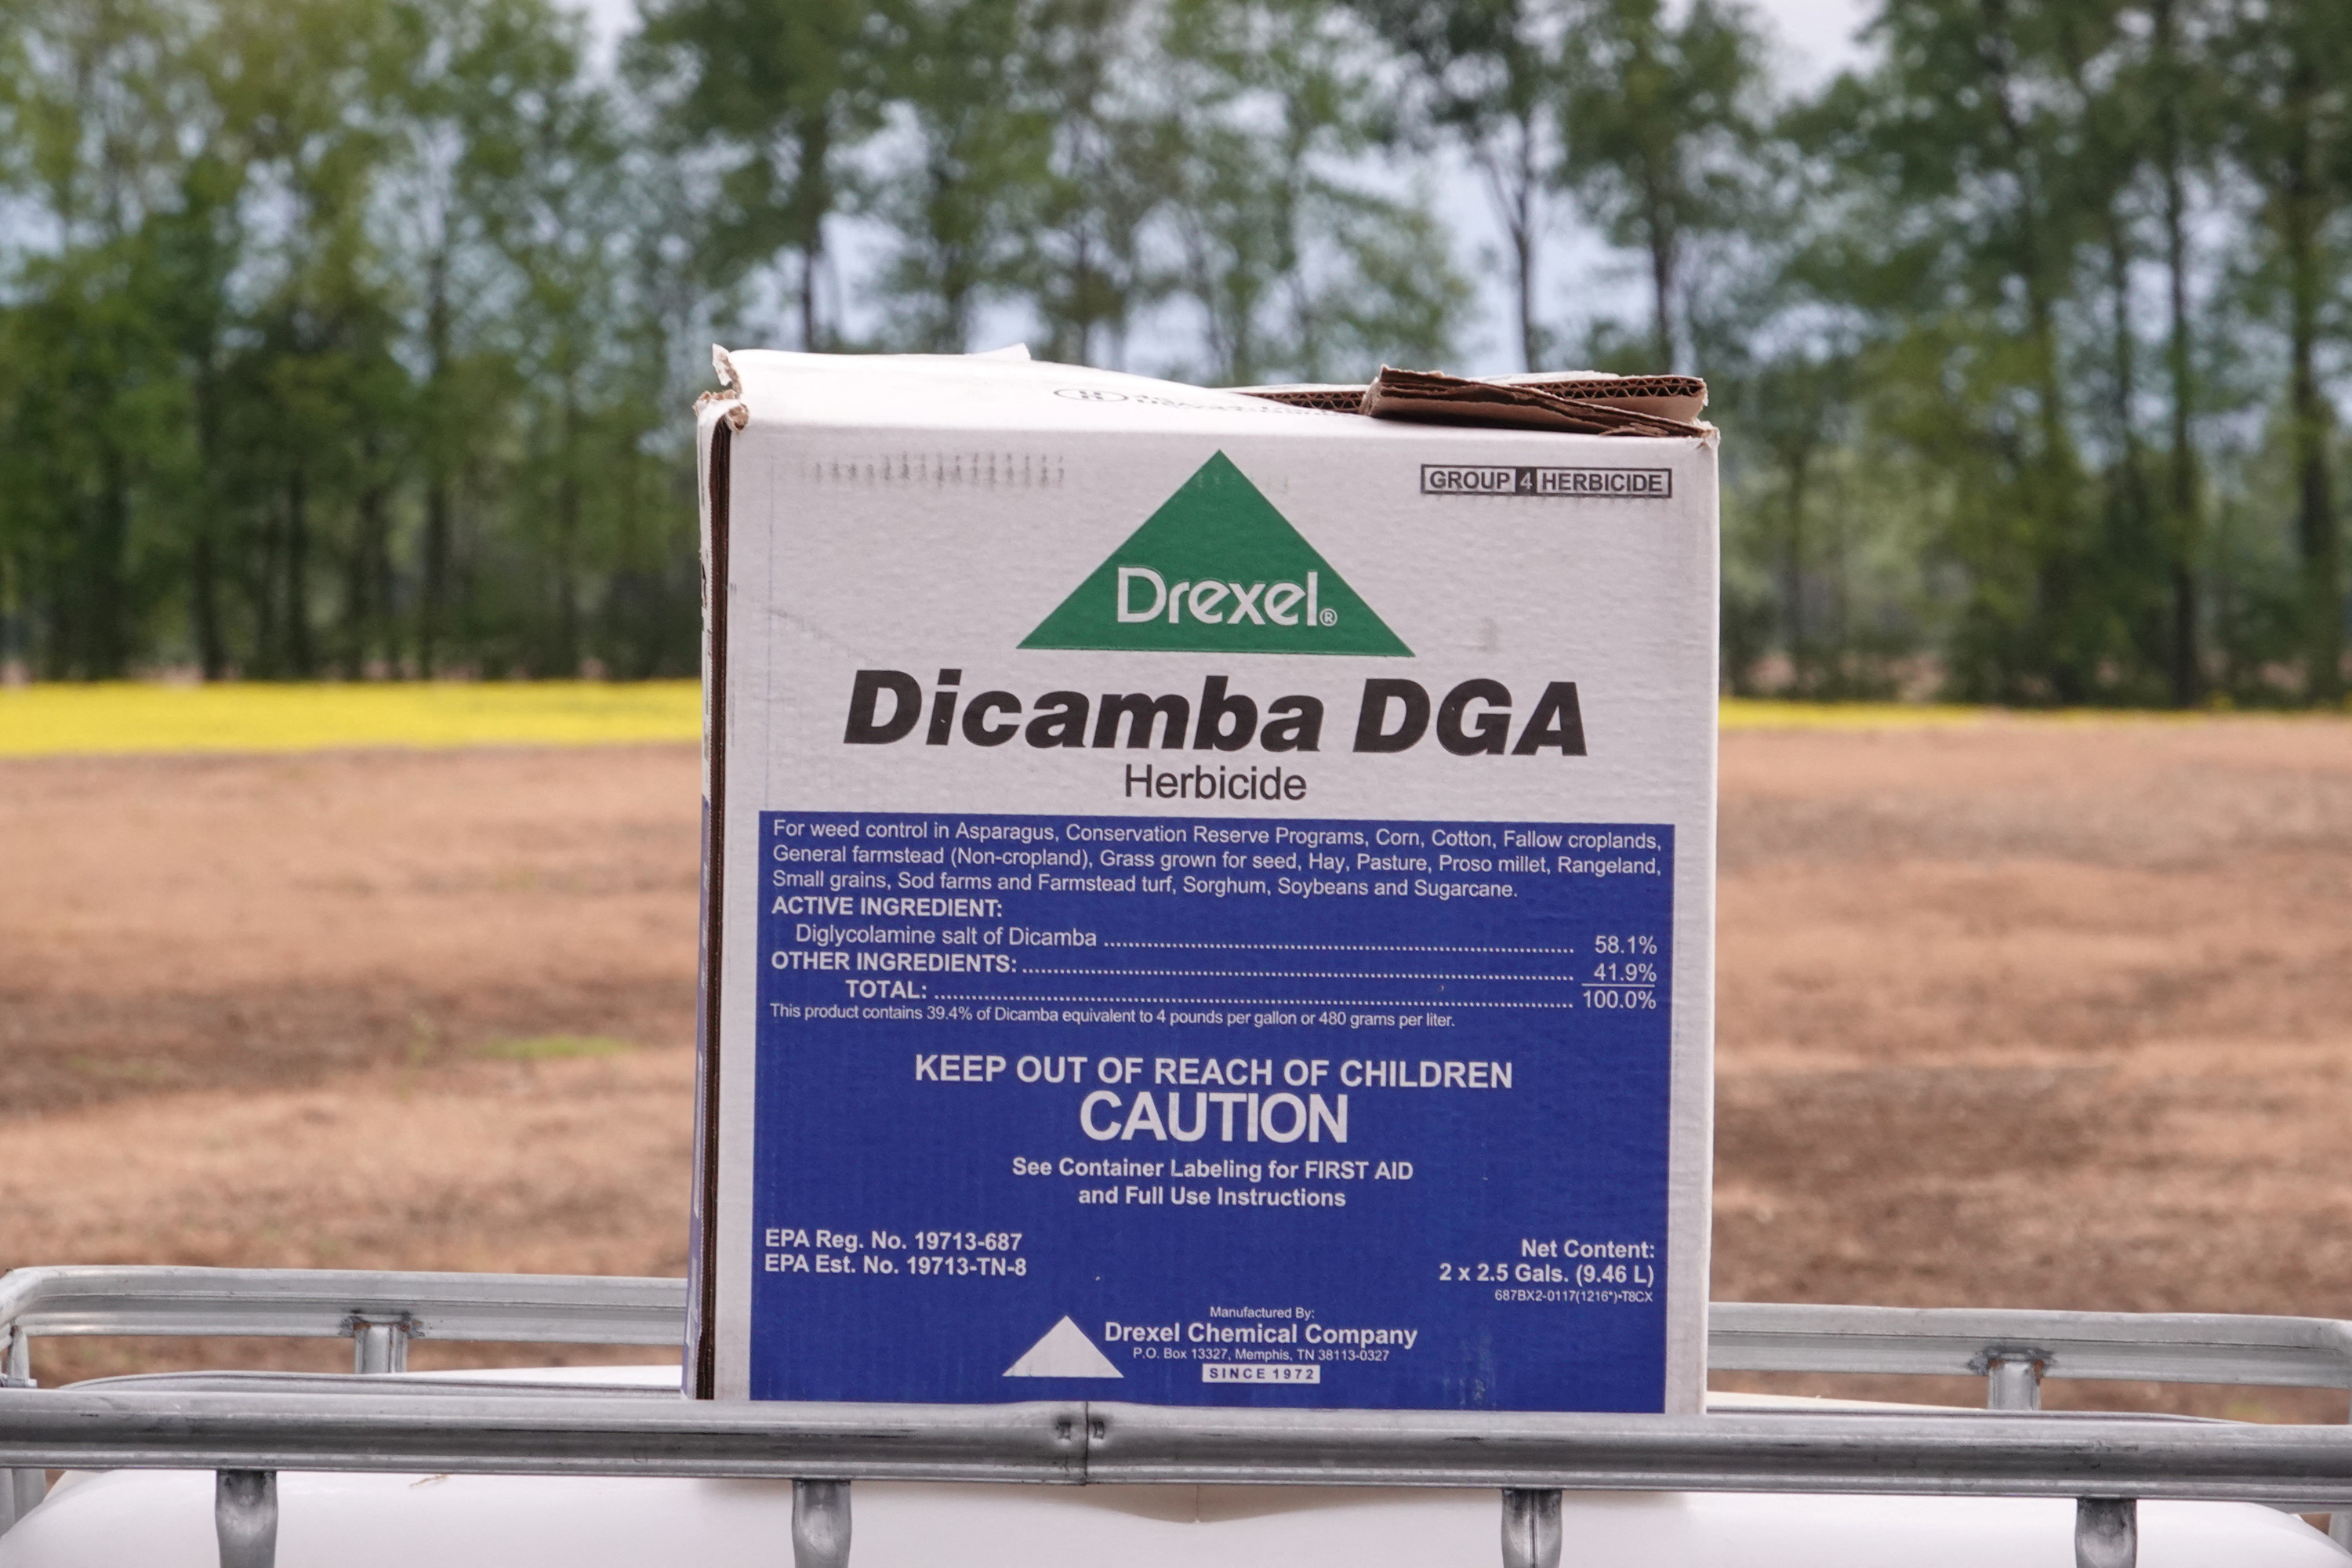 A box of Drexel herbicide Dicamba DGA lies on a truck bed at a farm in Ridgely